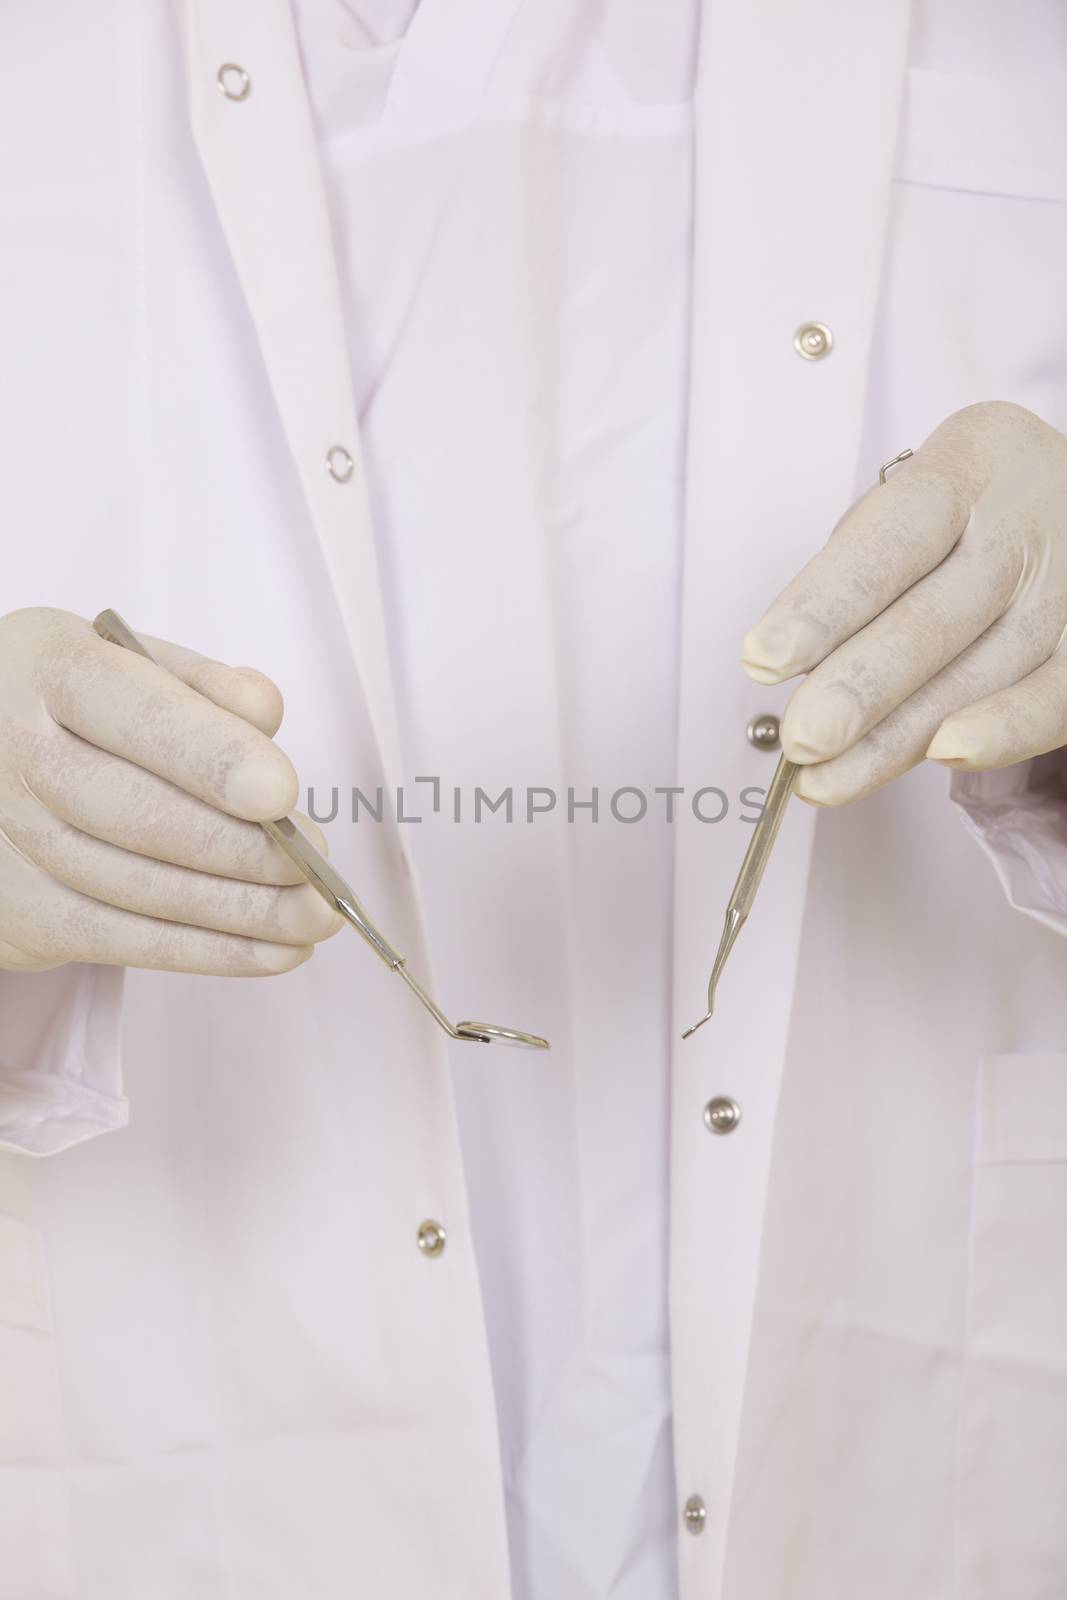 A dentists hands in white medical gloves with dental tools